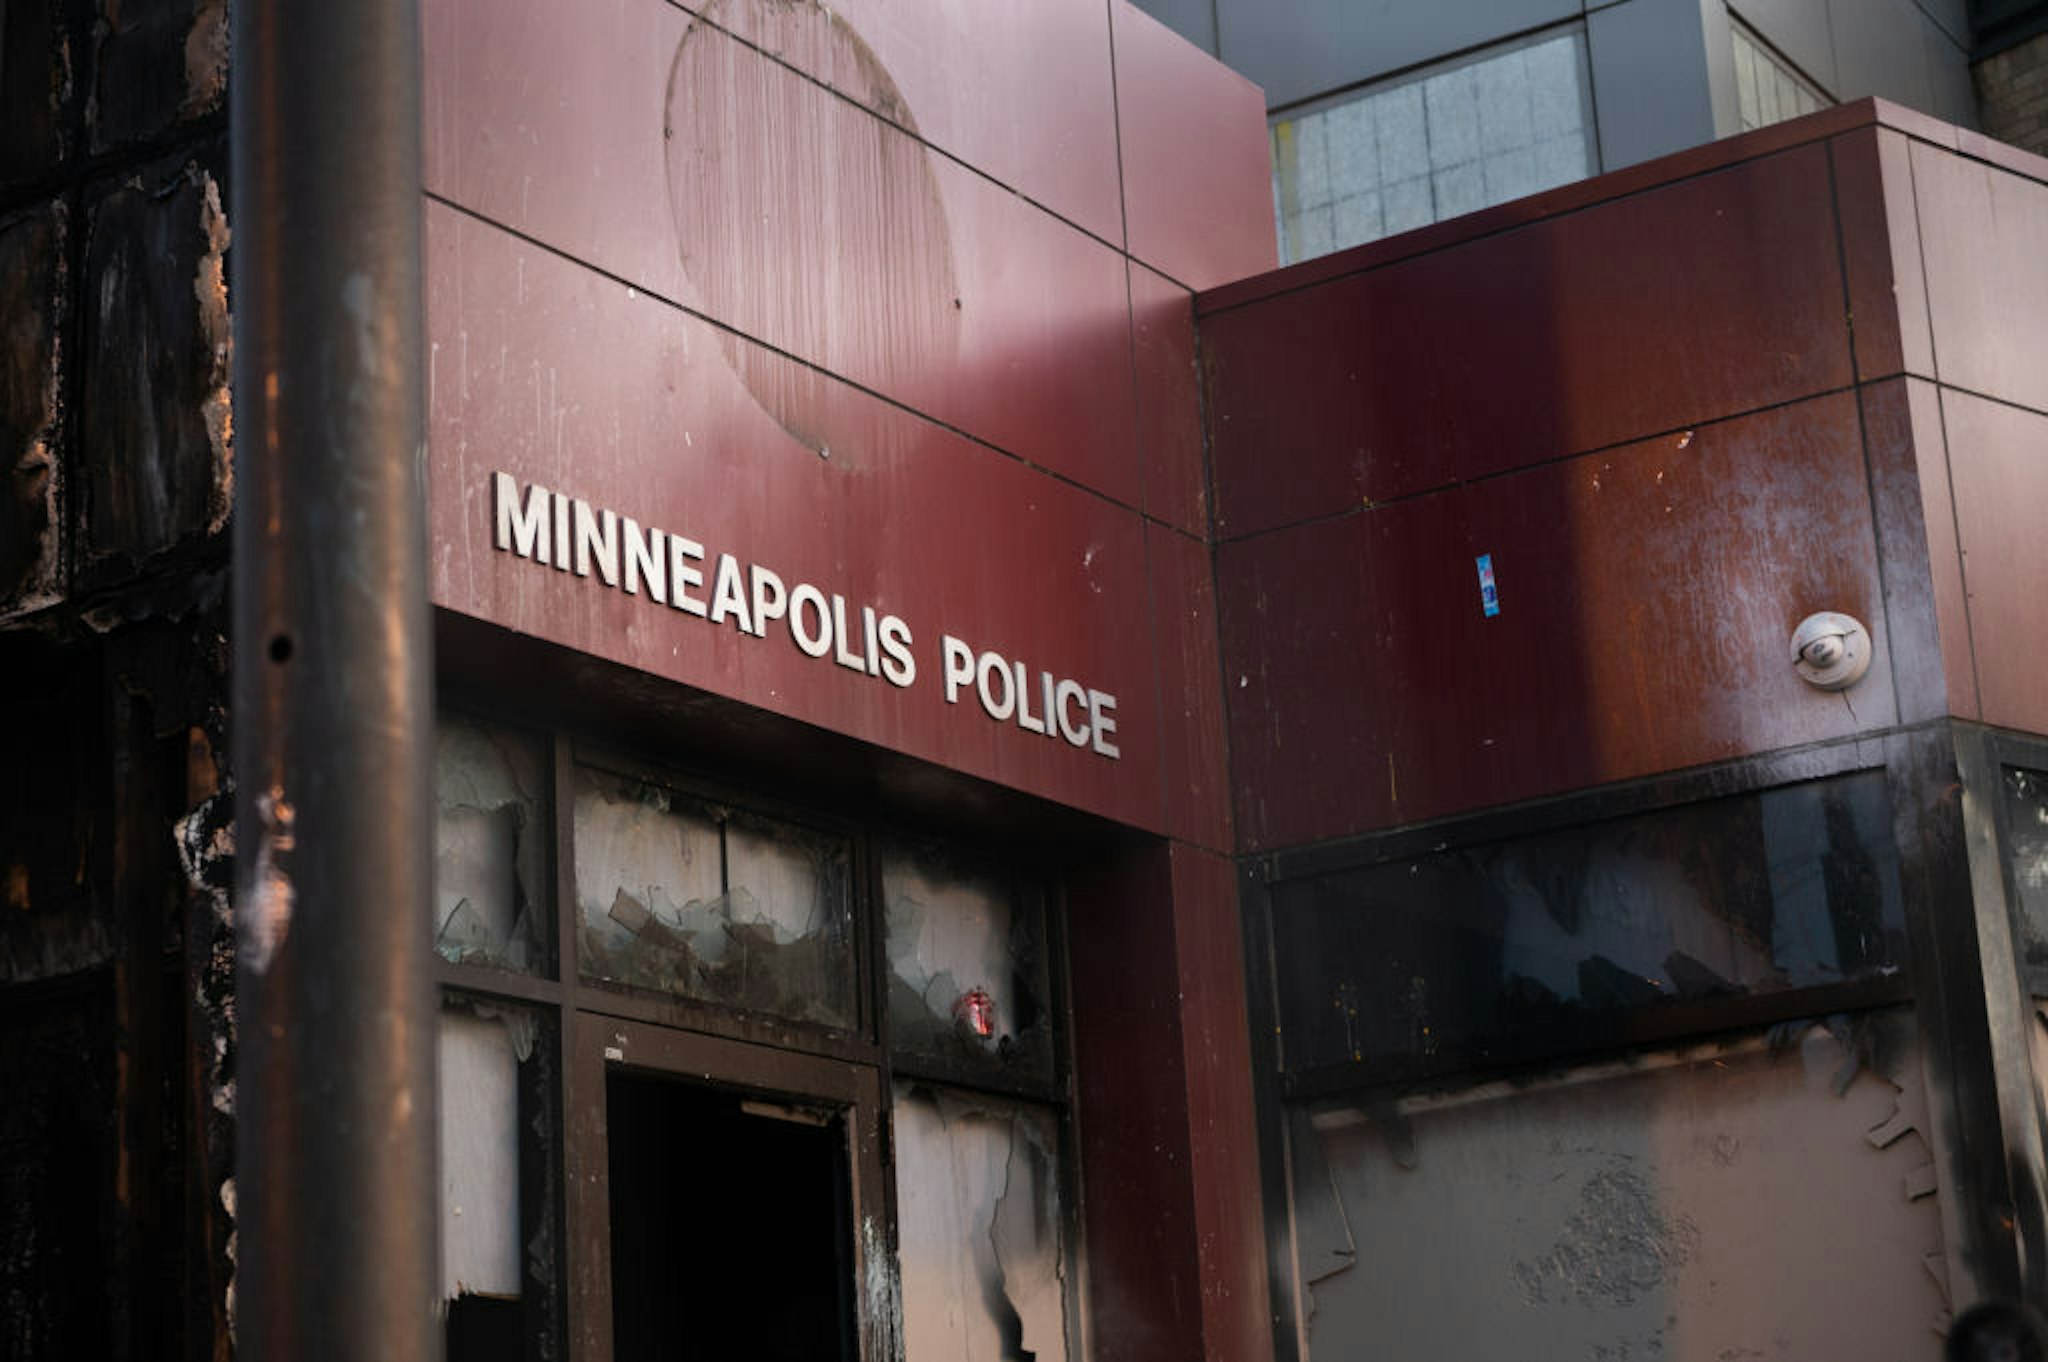 The 3rd Precinct Police Station was abandoned by police and protestors took destroying it and raiding it after one of Minneapolis' police officers killed an African-American man named George Floyd in Minneapolis, United States, on May 29, 2020. Protests continued following the death of George Floyd, who died after being restrained by Minneapolis police officers on Memorial Day. (Photo by Zach D Roberts/NurPhoto via Getty Images)